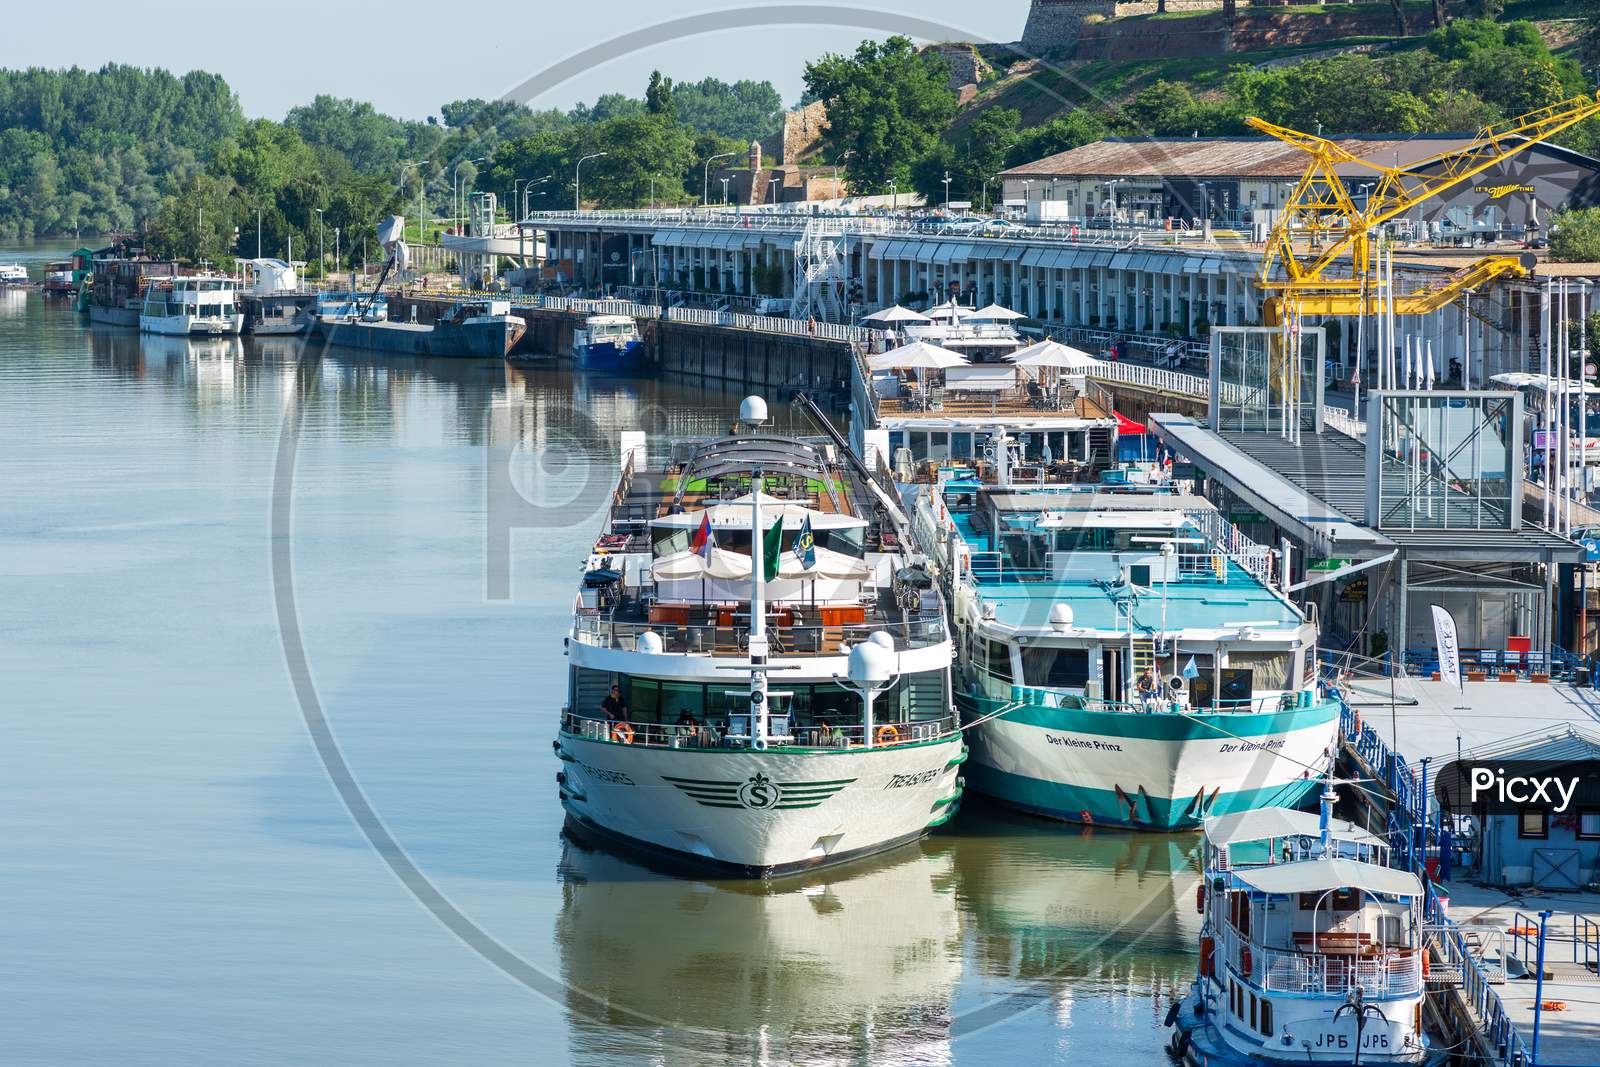 Passenger Ships And Riverboats Docked In The Port Of Belgrade, Serbia